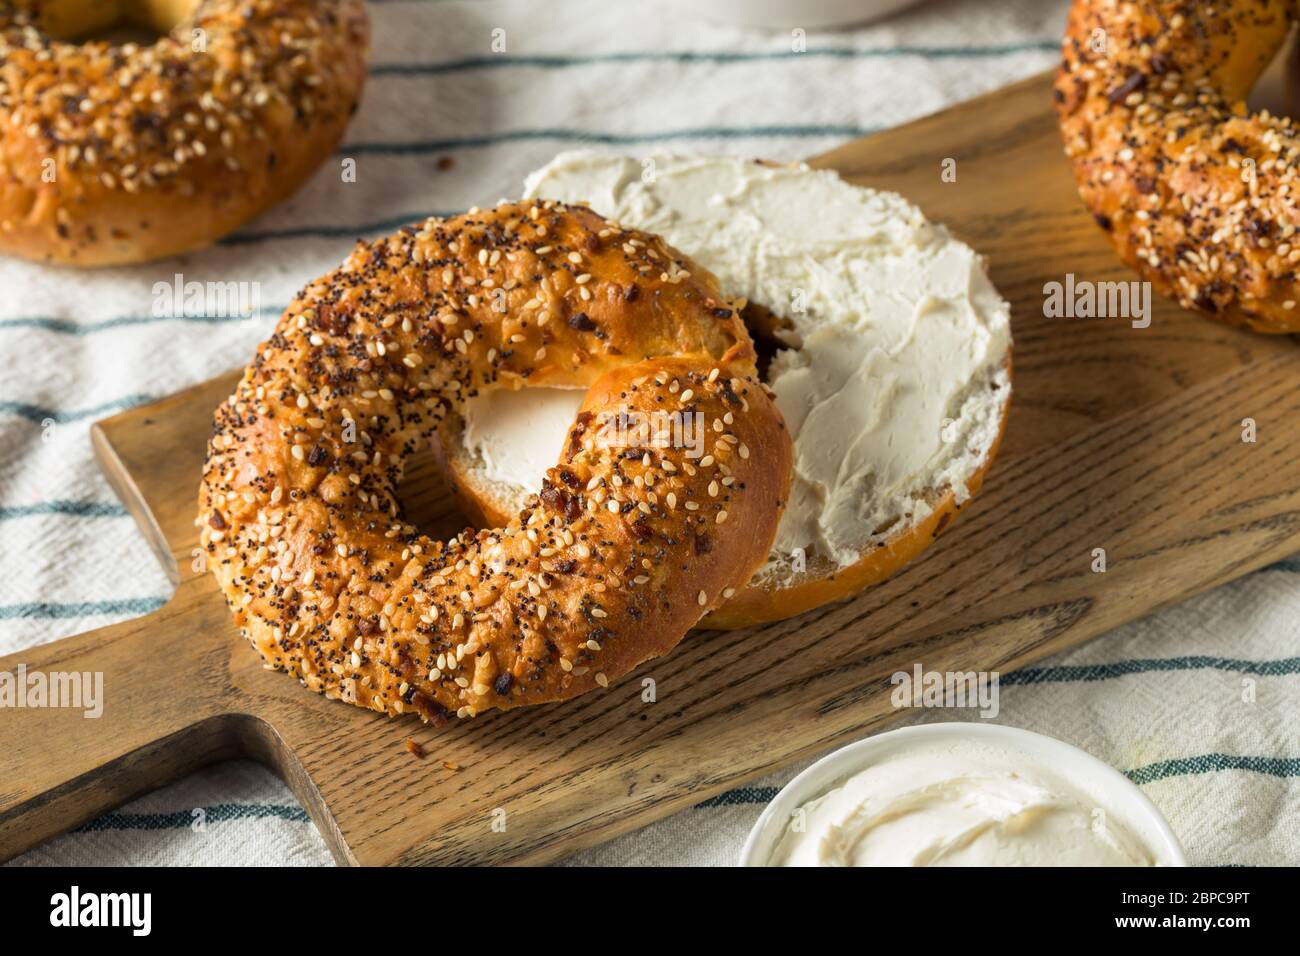 Homemade Toasted Everything New York Bagel with Cream Cheese Stock Photo